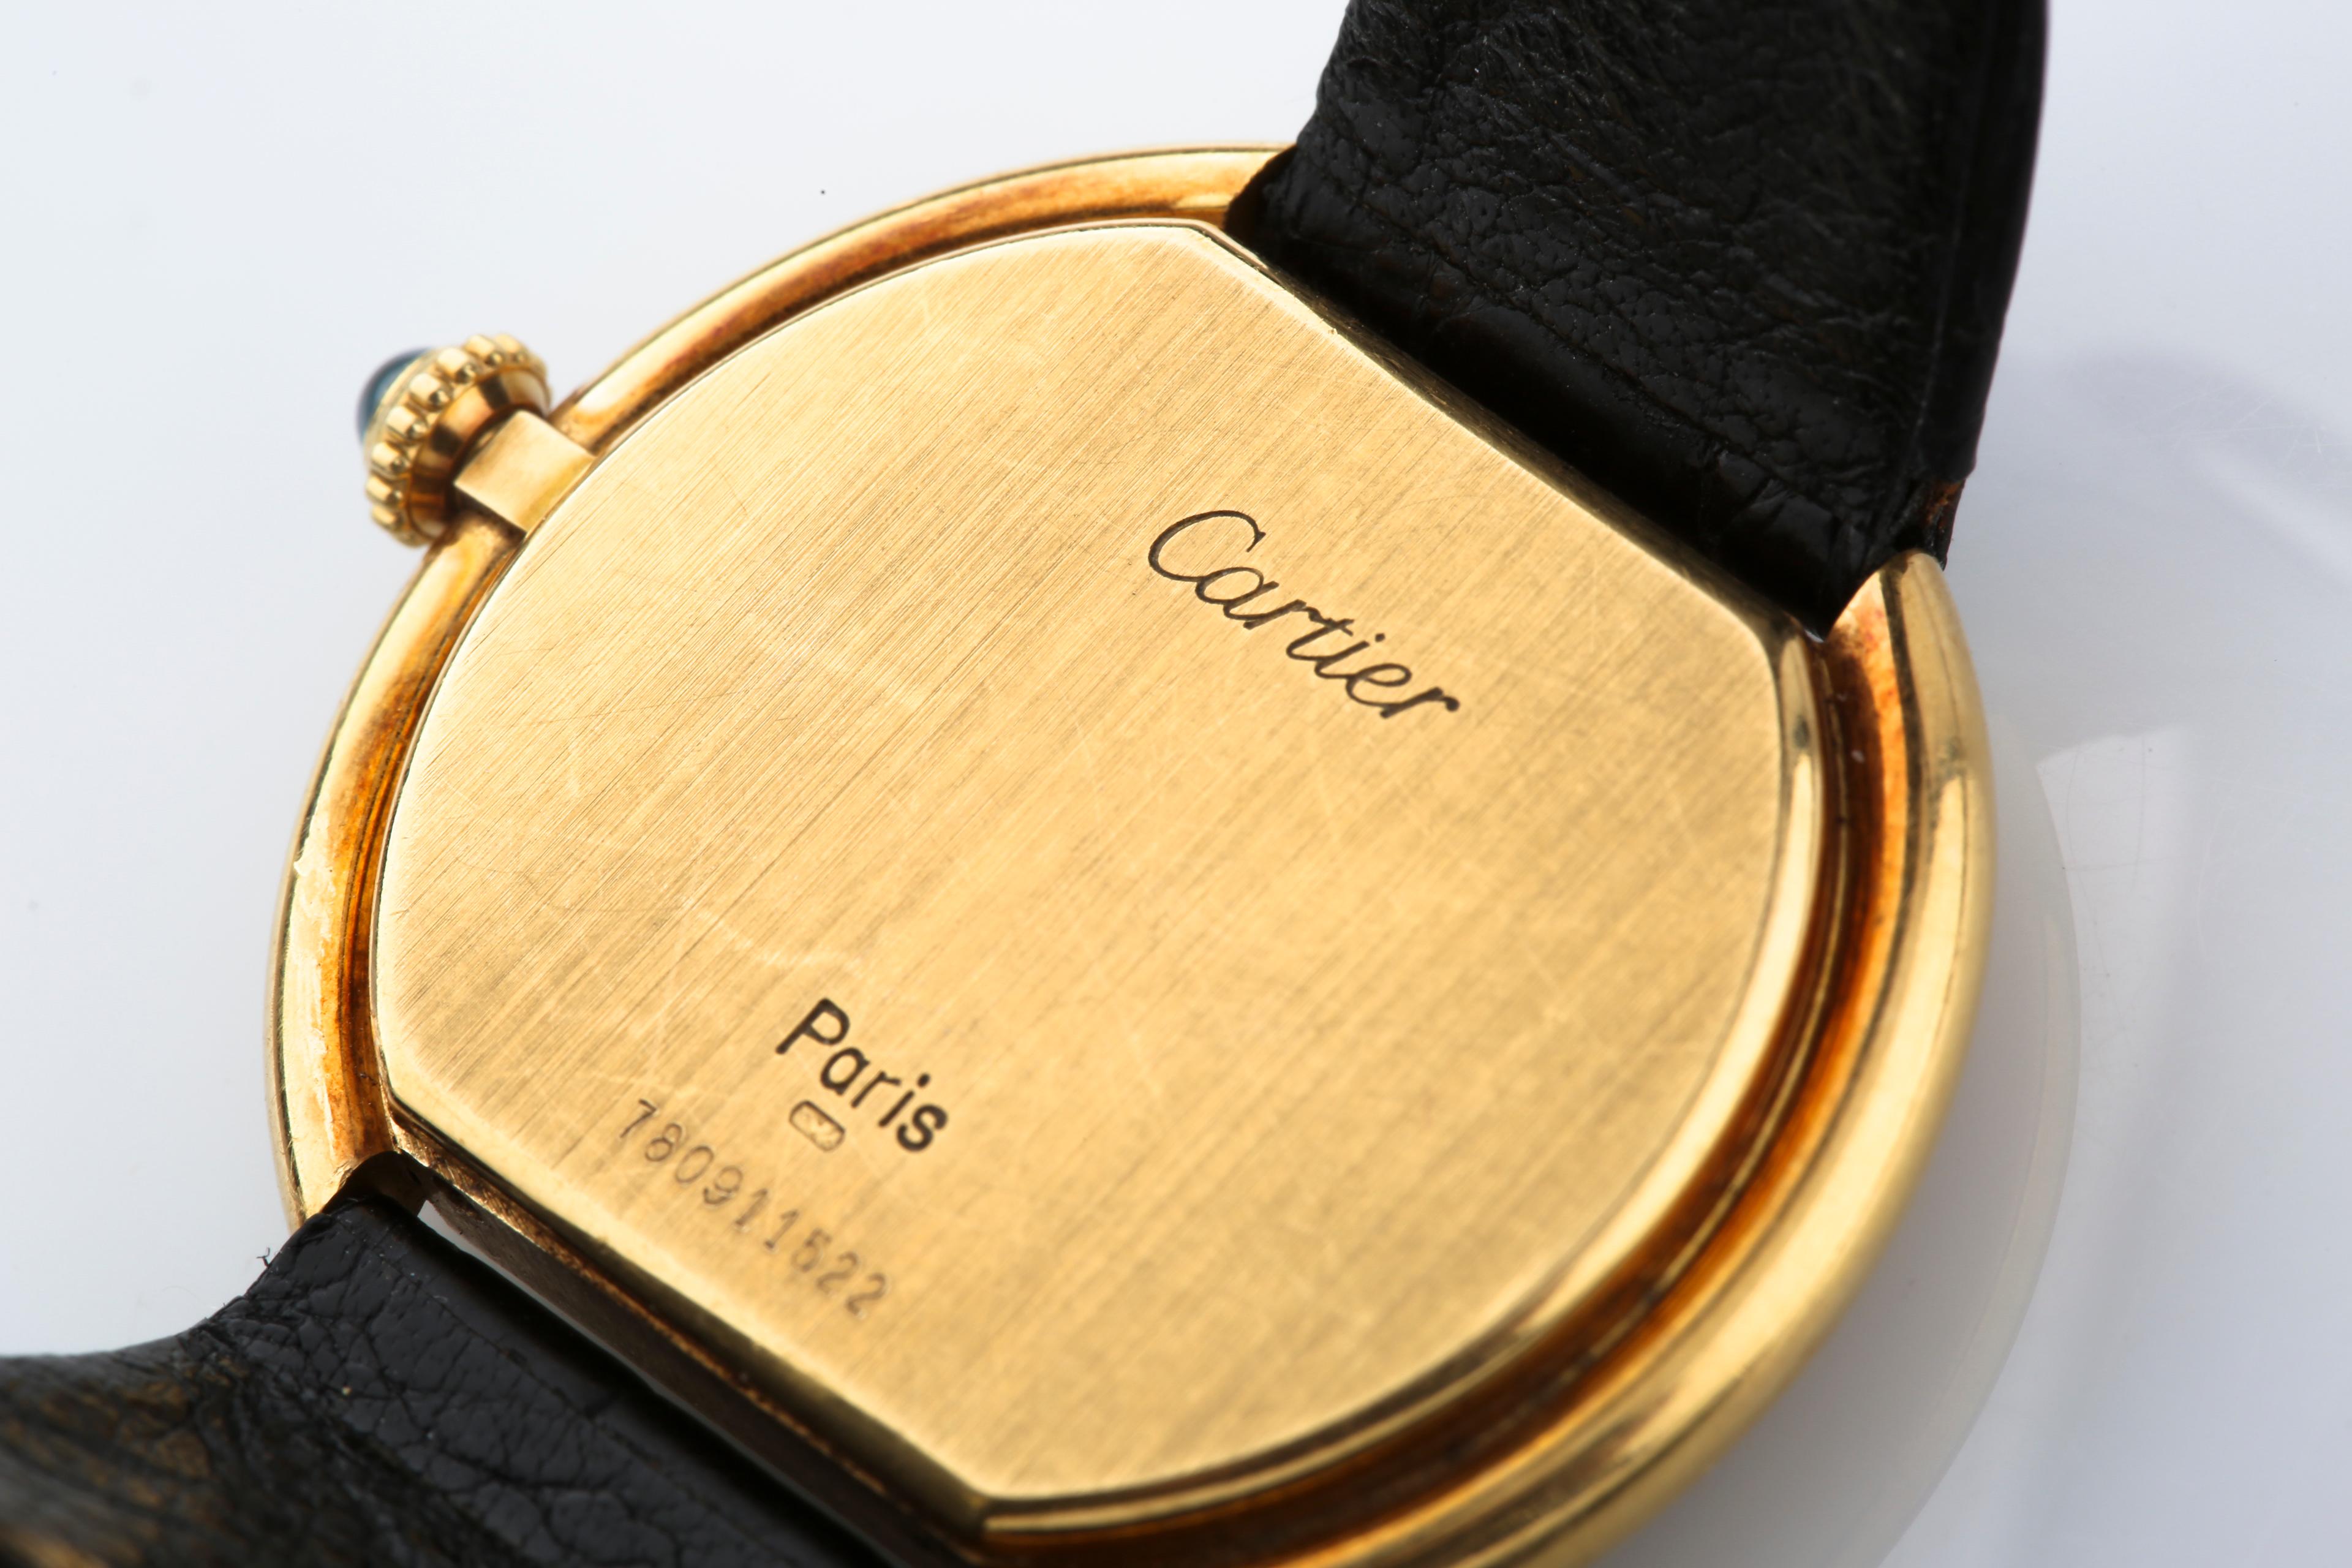 Cartier Ellipse 18 Karat Yellow Gold Women's Wristwatch with Leather Band 1